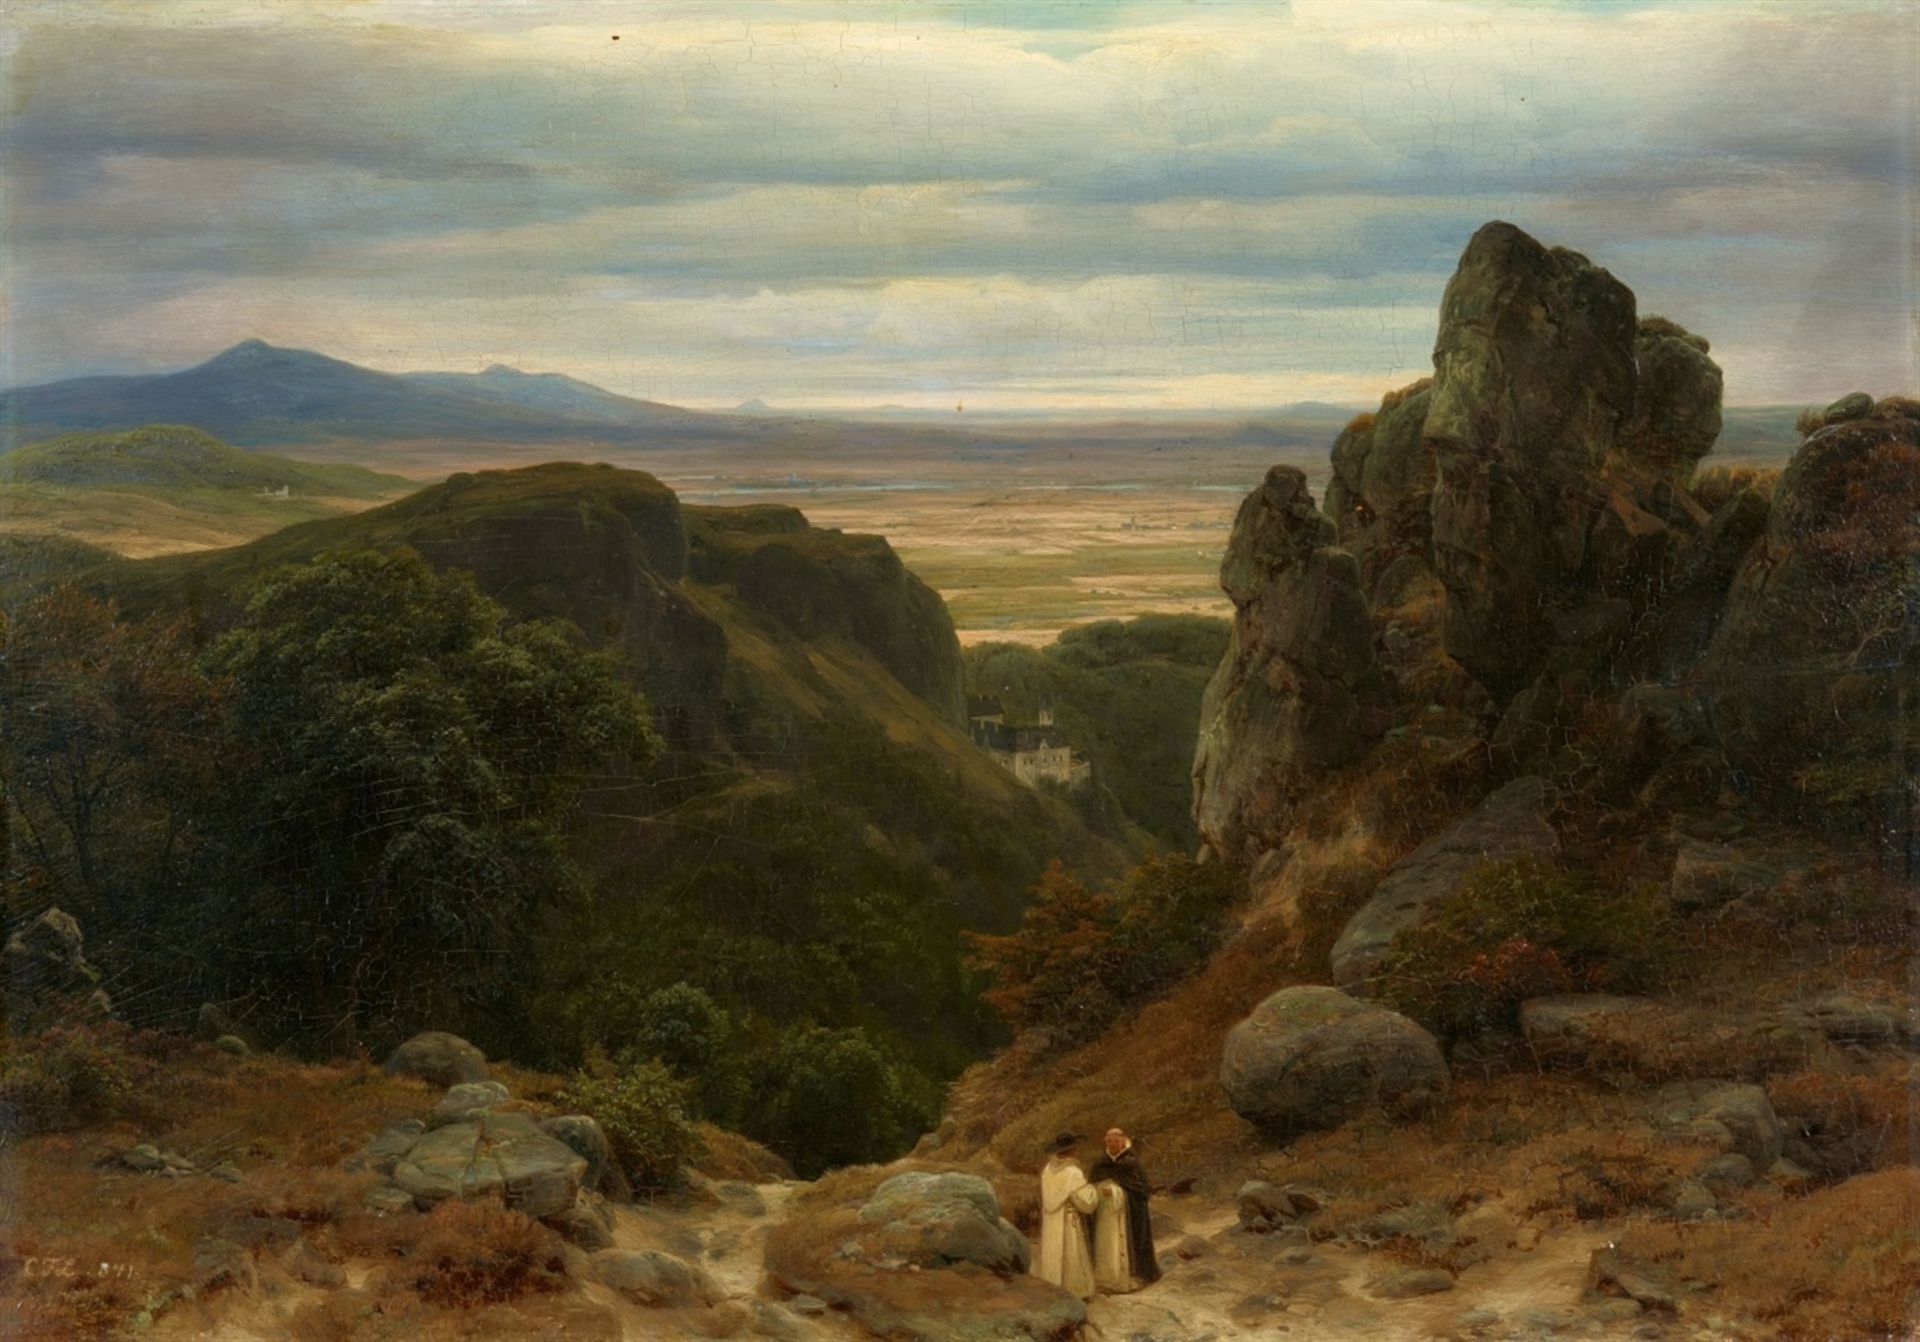 Carl Friedrich LessingLandscape with a Castle and Two MonksOil on panel. 39 x 55 cm.Monogrammed